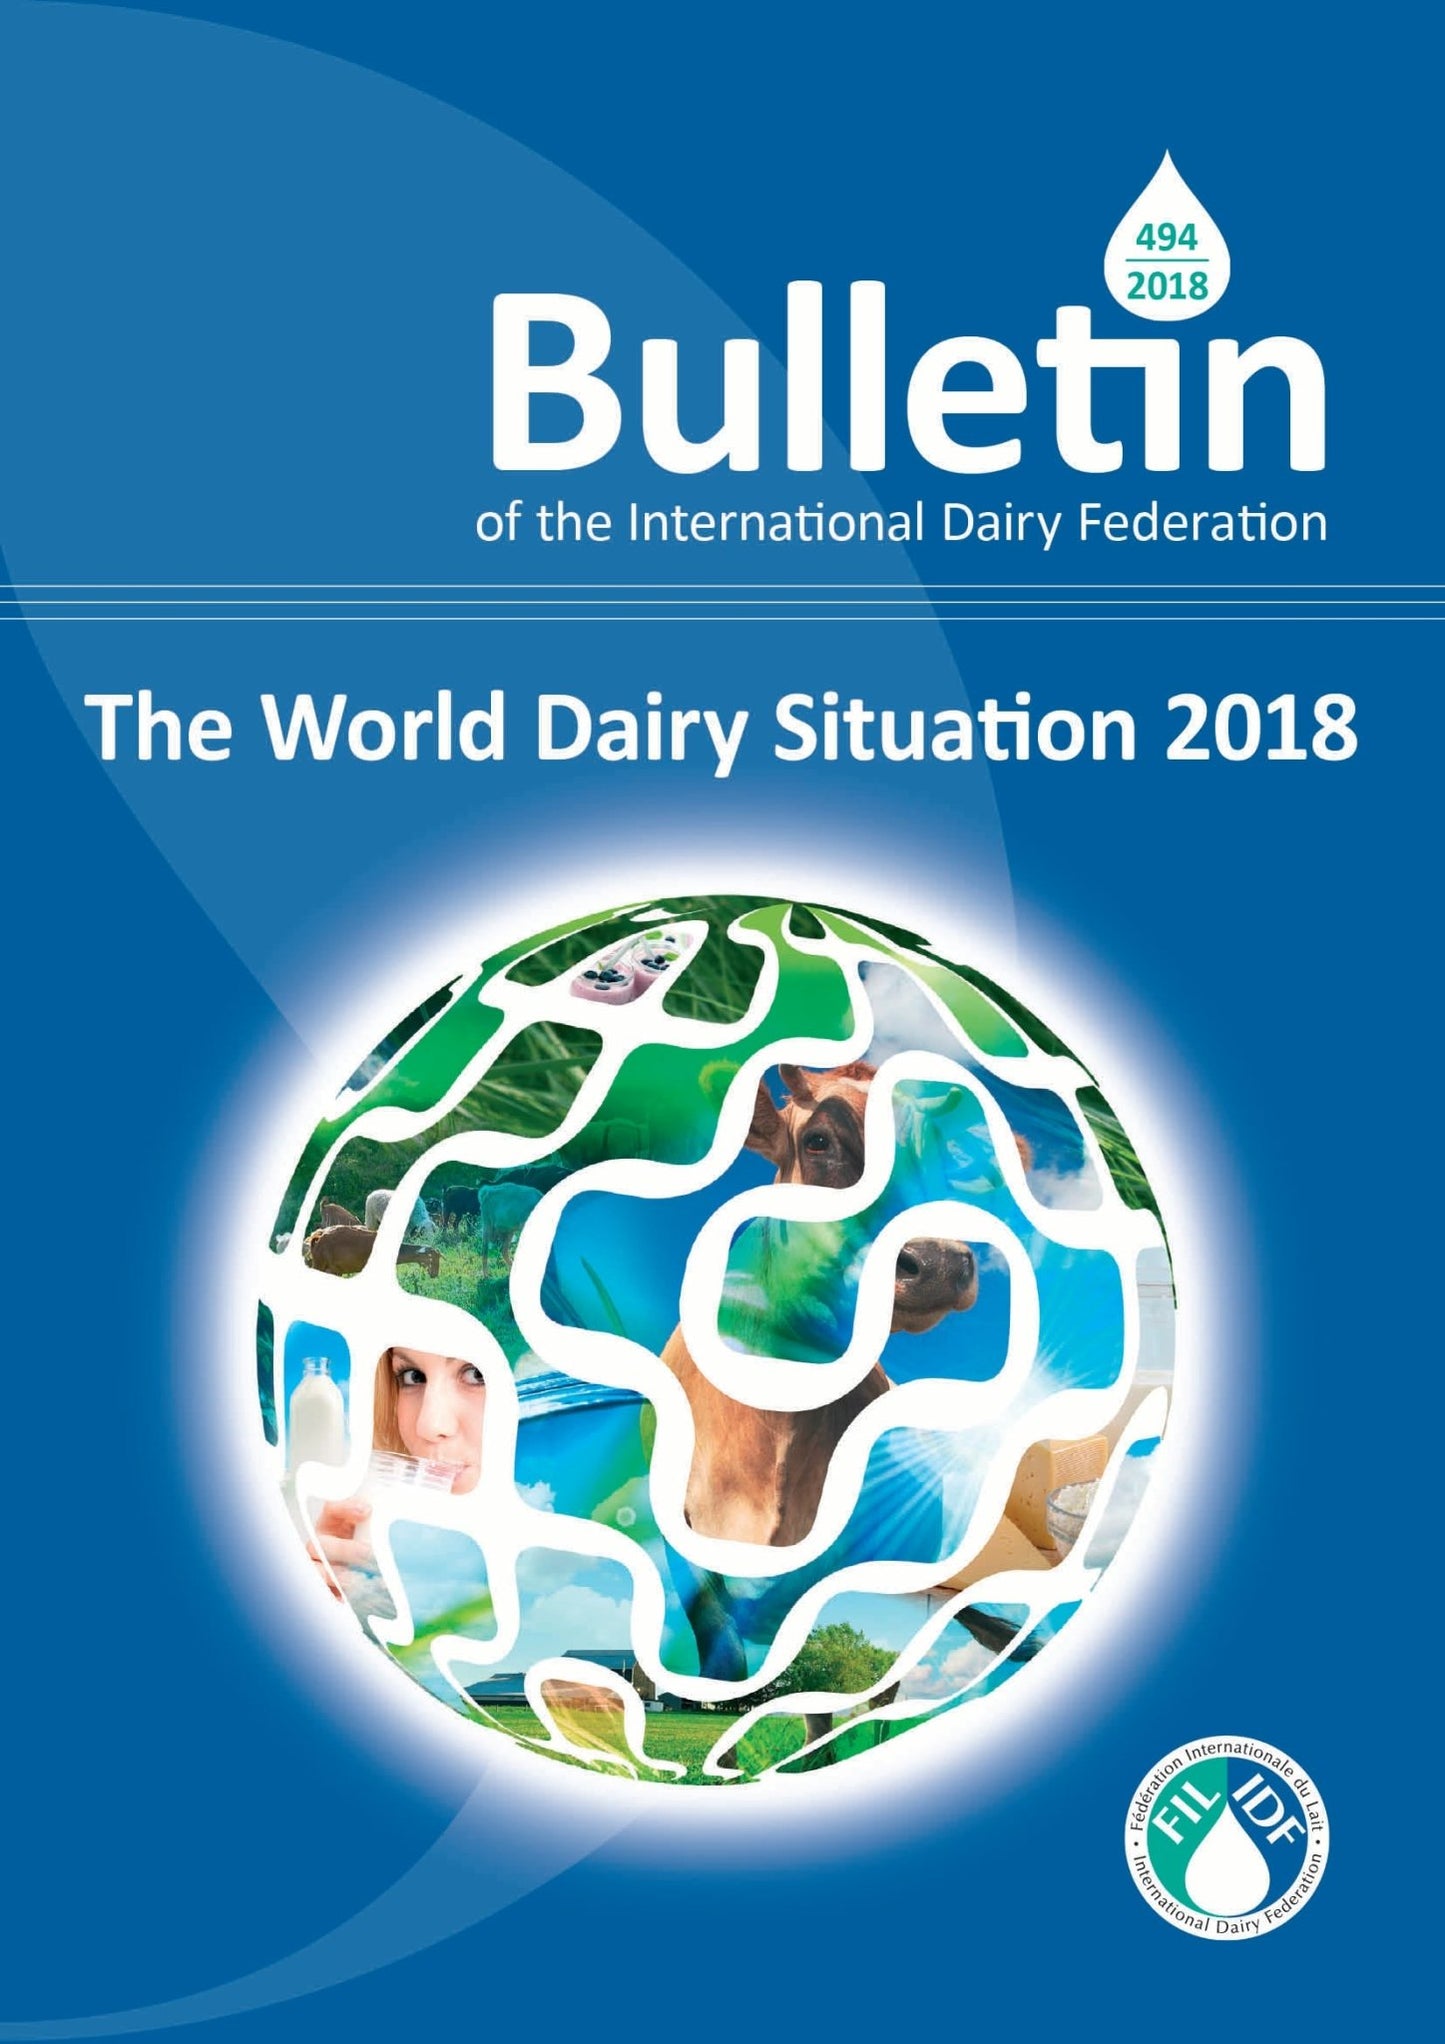 Bulletin of the IDF N° 494/2018: The World Dairy Situation 2018 - FIL-IDF